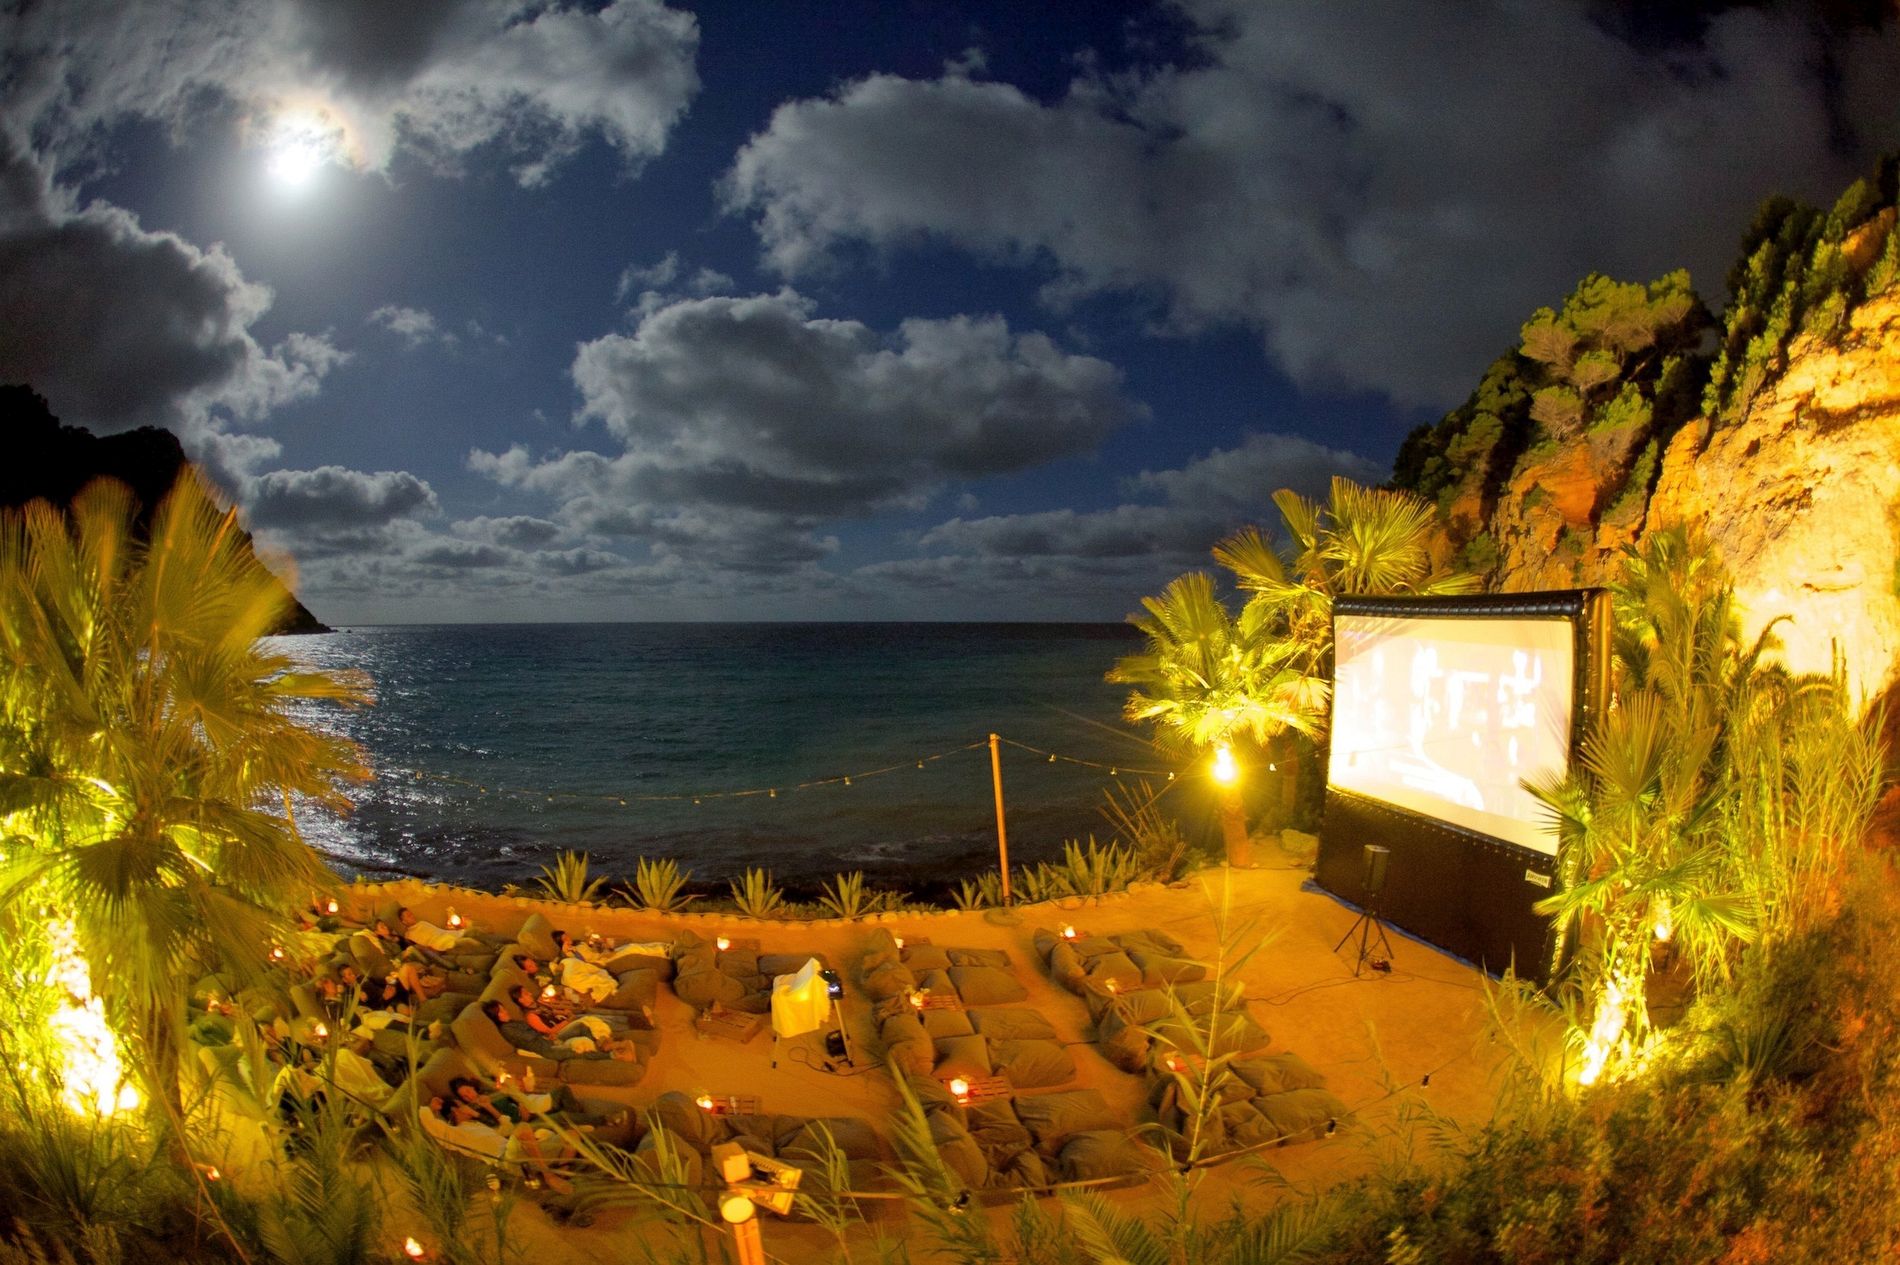 Stellar views of the beach, bean bags, cocktails and more - This movie